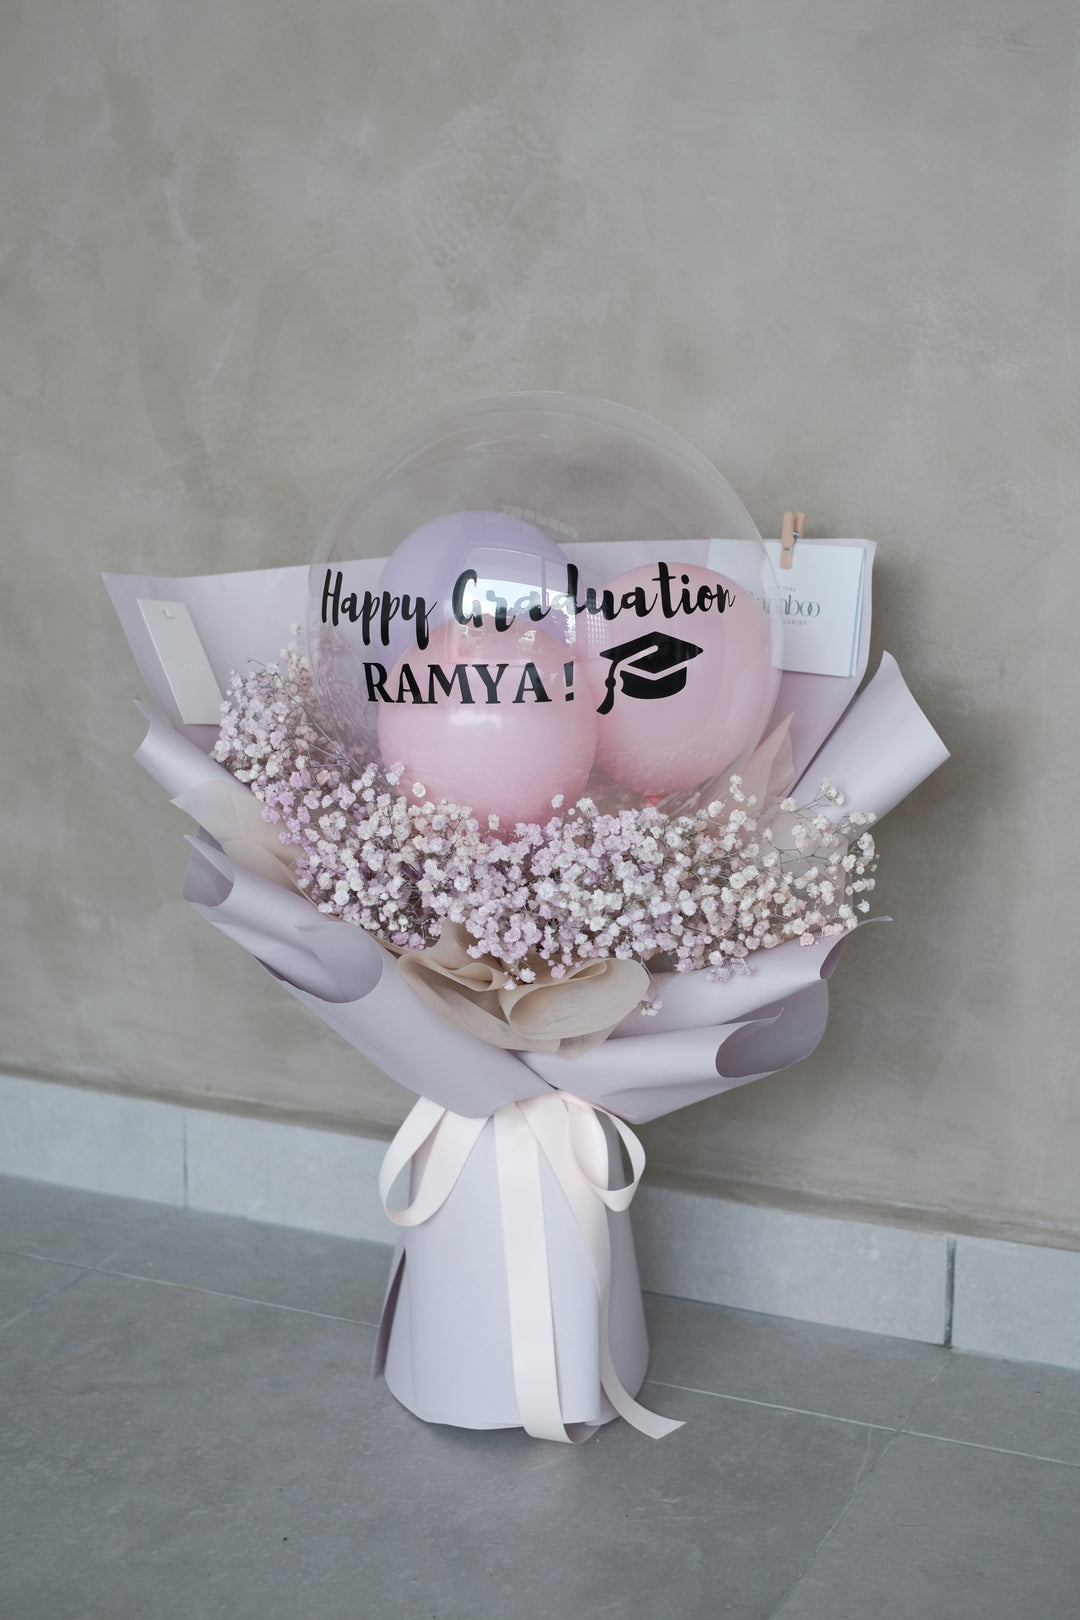 flower arrangements ideas by floristry Bamboo Green Florist Penang, graduation flowers with baby breaths and balloon, same day flower delivery